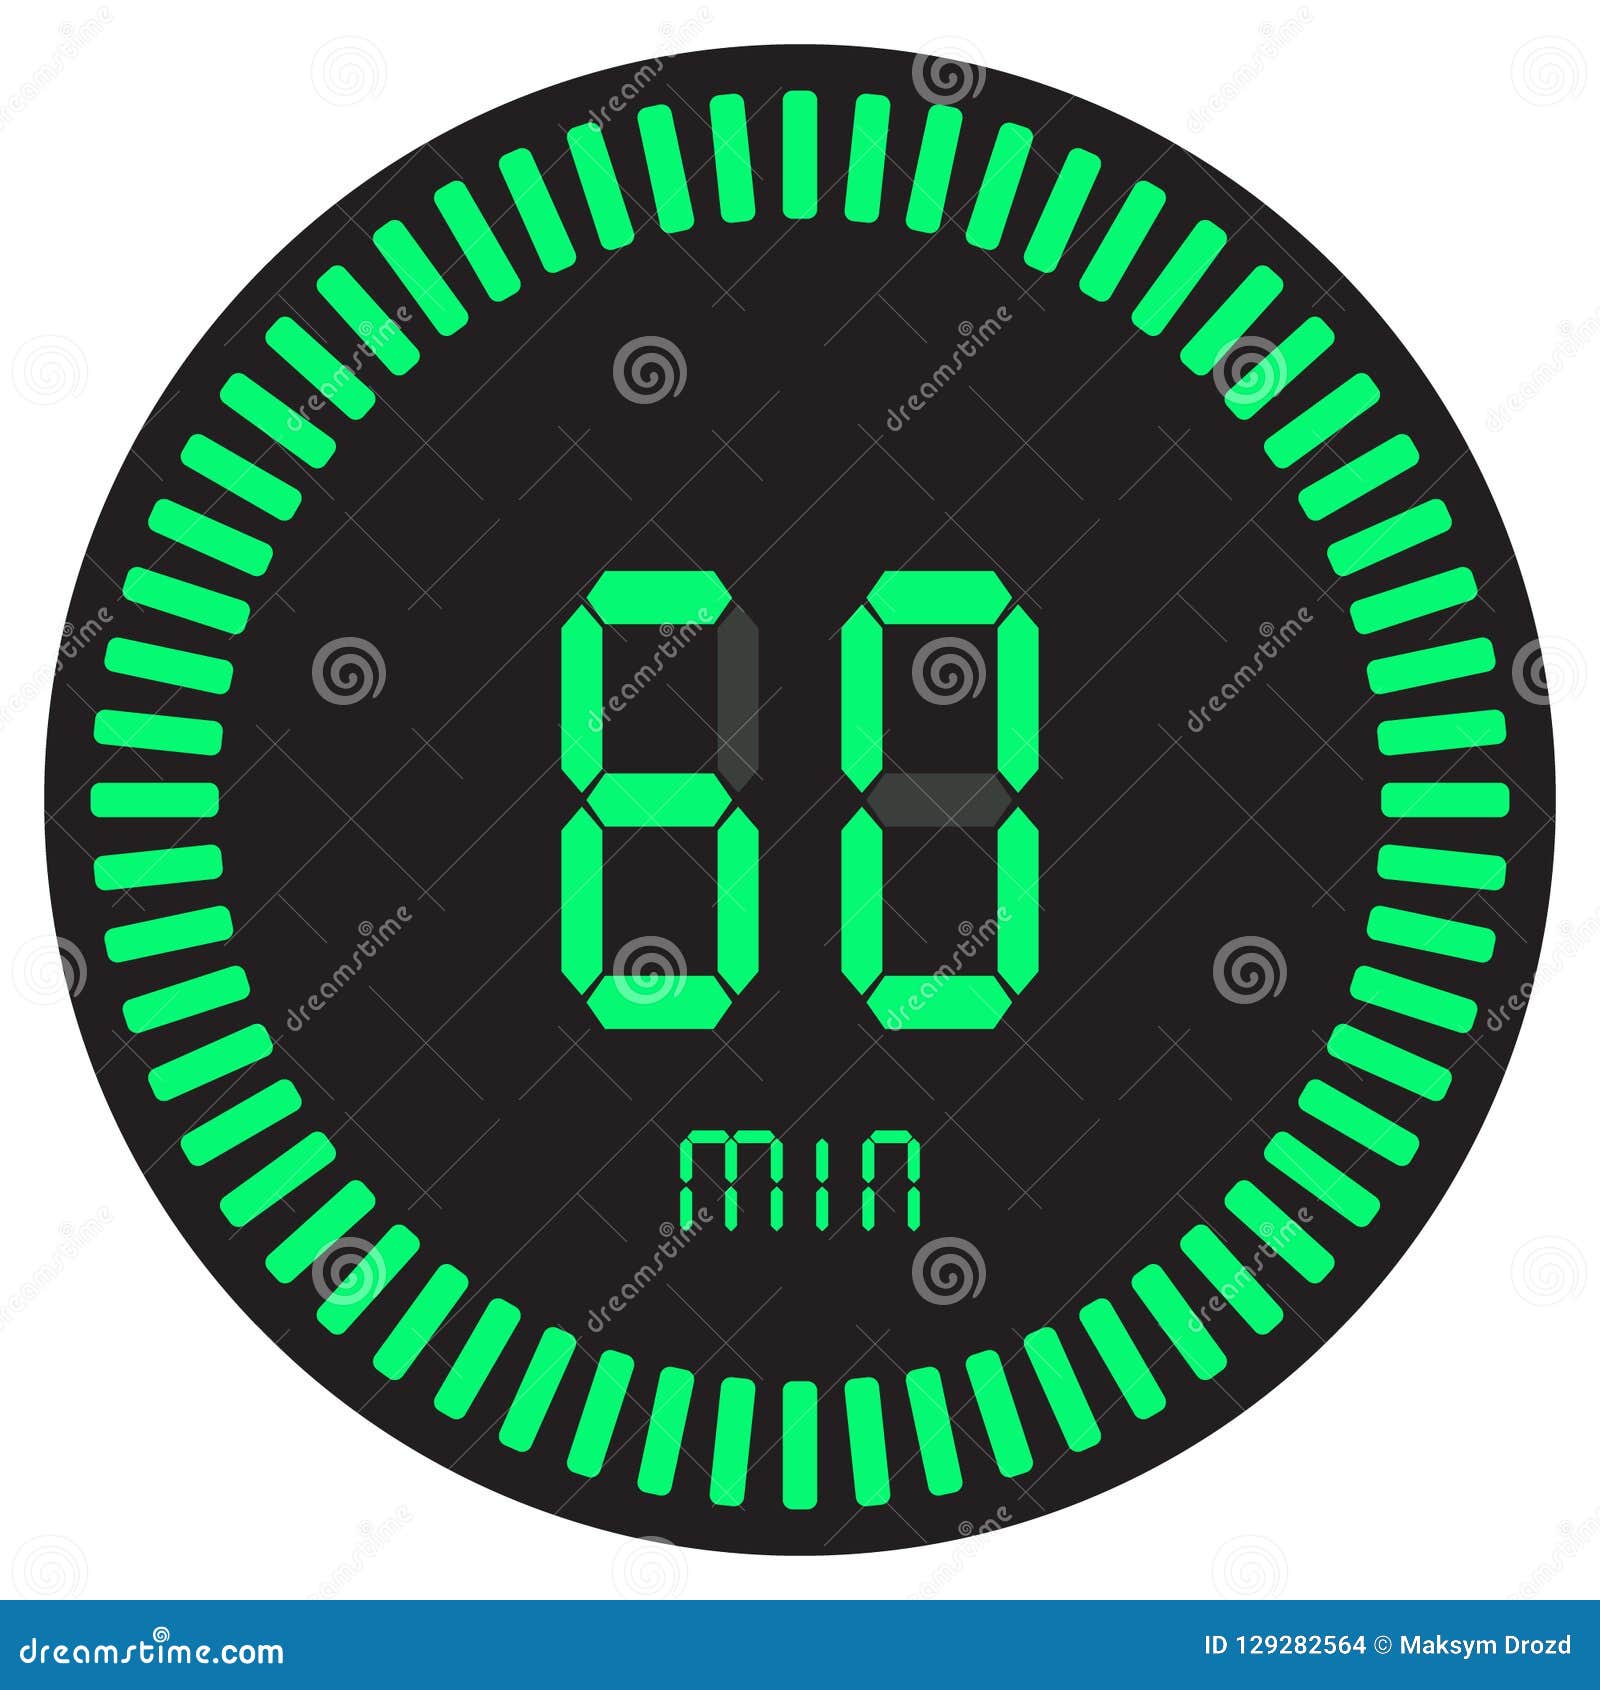 https://thumbs.dreamstime.com/z/green-digital-timer-minutes-hour-electronic-stopwatch-gradient-dial-starting-vector-icon-clock-watch-green-129282564.jpg